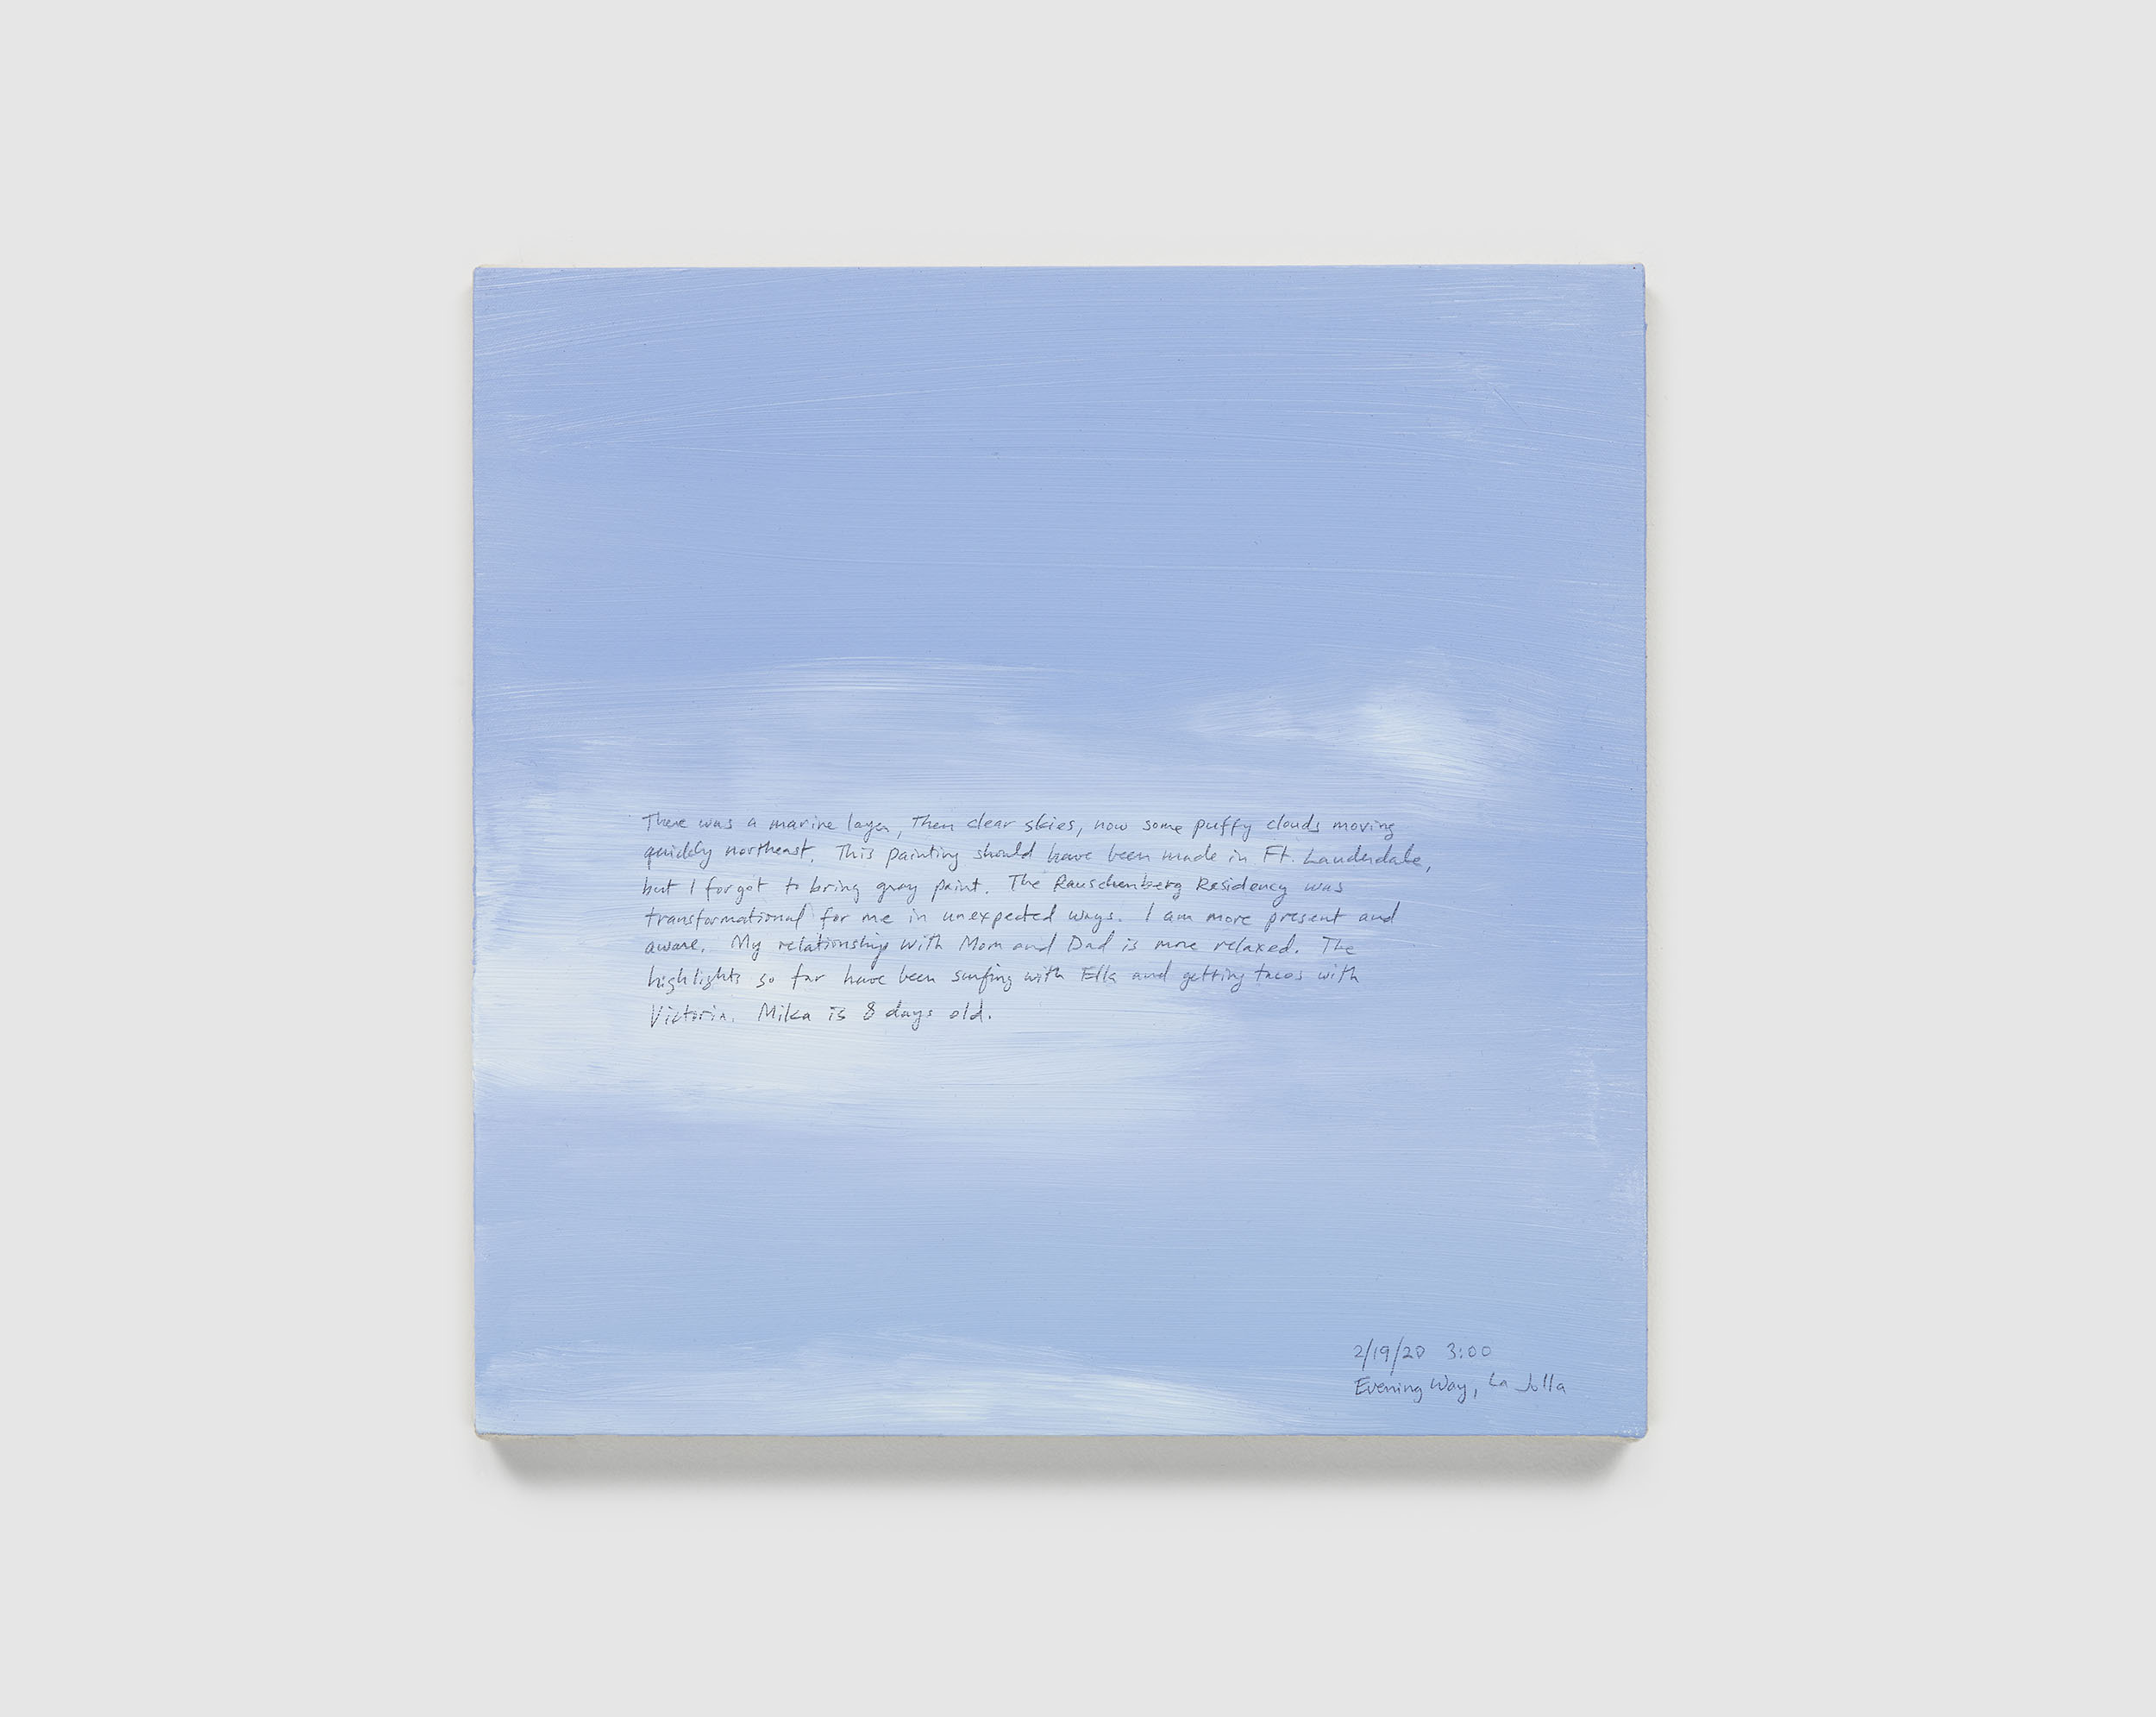 A 14 × 14 inch, acrylic painting of the sky. A journal entry is handwritten on the painting:

“There was a marine layer, then clear skies, now some puffy clouds moving quickly northeast. This painting should have been made in Ft. Lauderdale, but I forgot to bring grey paint. The Rauschenberg Residency was transformational for me in unexpected ways. I am more present and aware. My relationship with Mom and Dad is more relaxed. The highlights so far have been surfing with Ella and getting tacos with Victoria. Mika is 8 days old.

2/19/20 3:00
Evening Way, La Jolla”